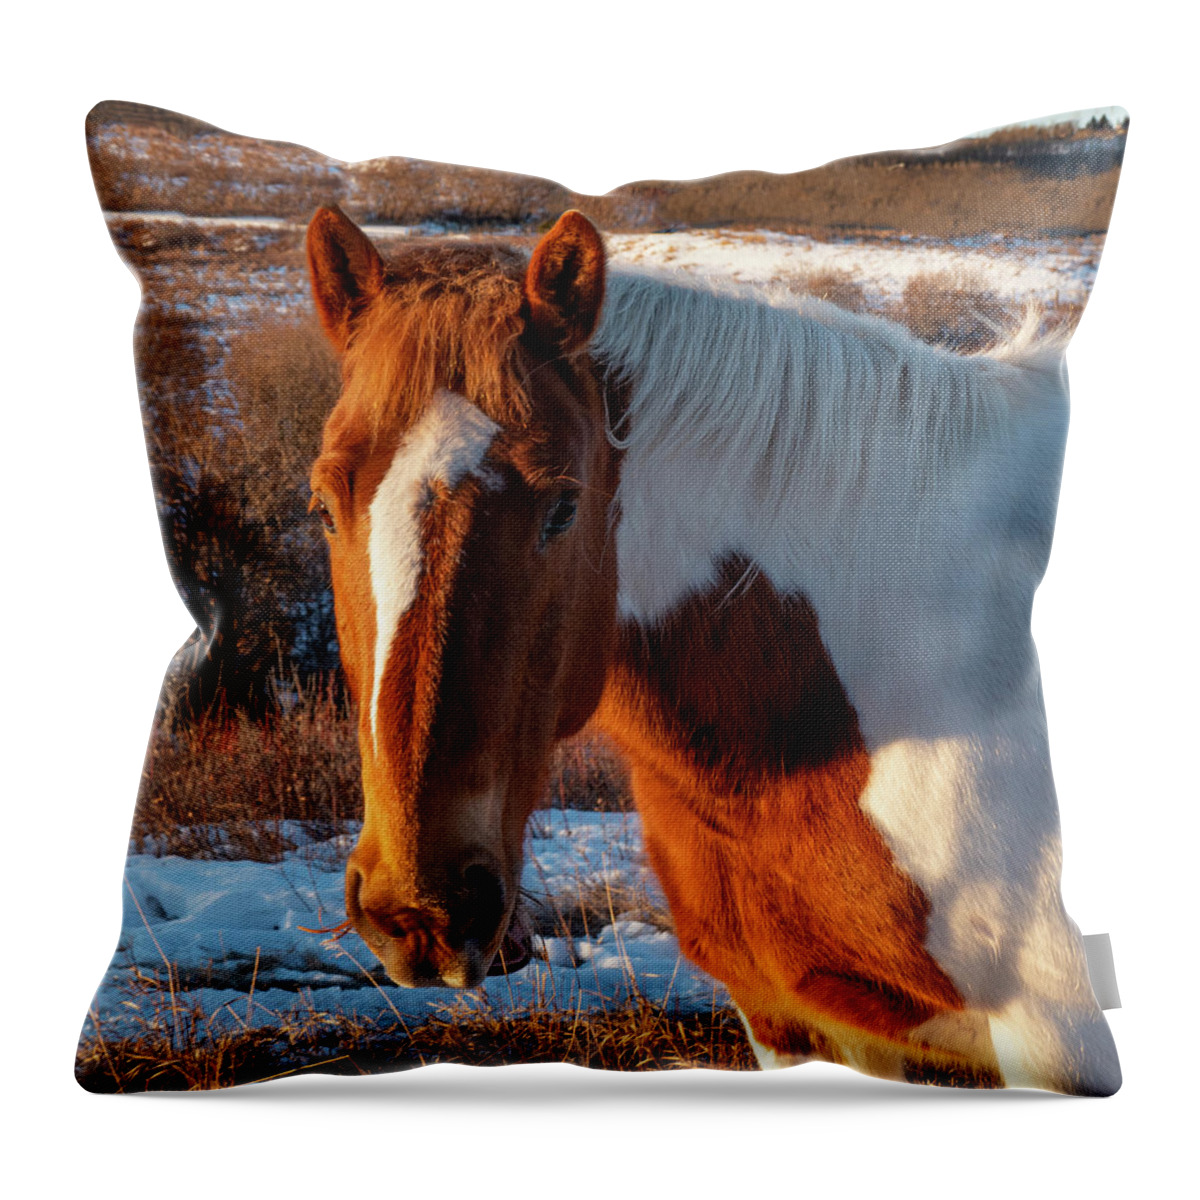 Horse Throw Pillow featuring the photograph Horse Portrait At Dawn by Karen Rispin